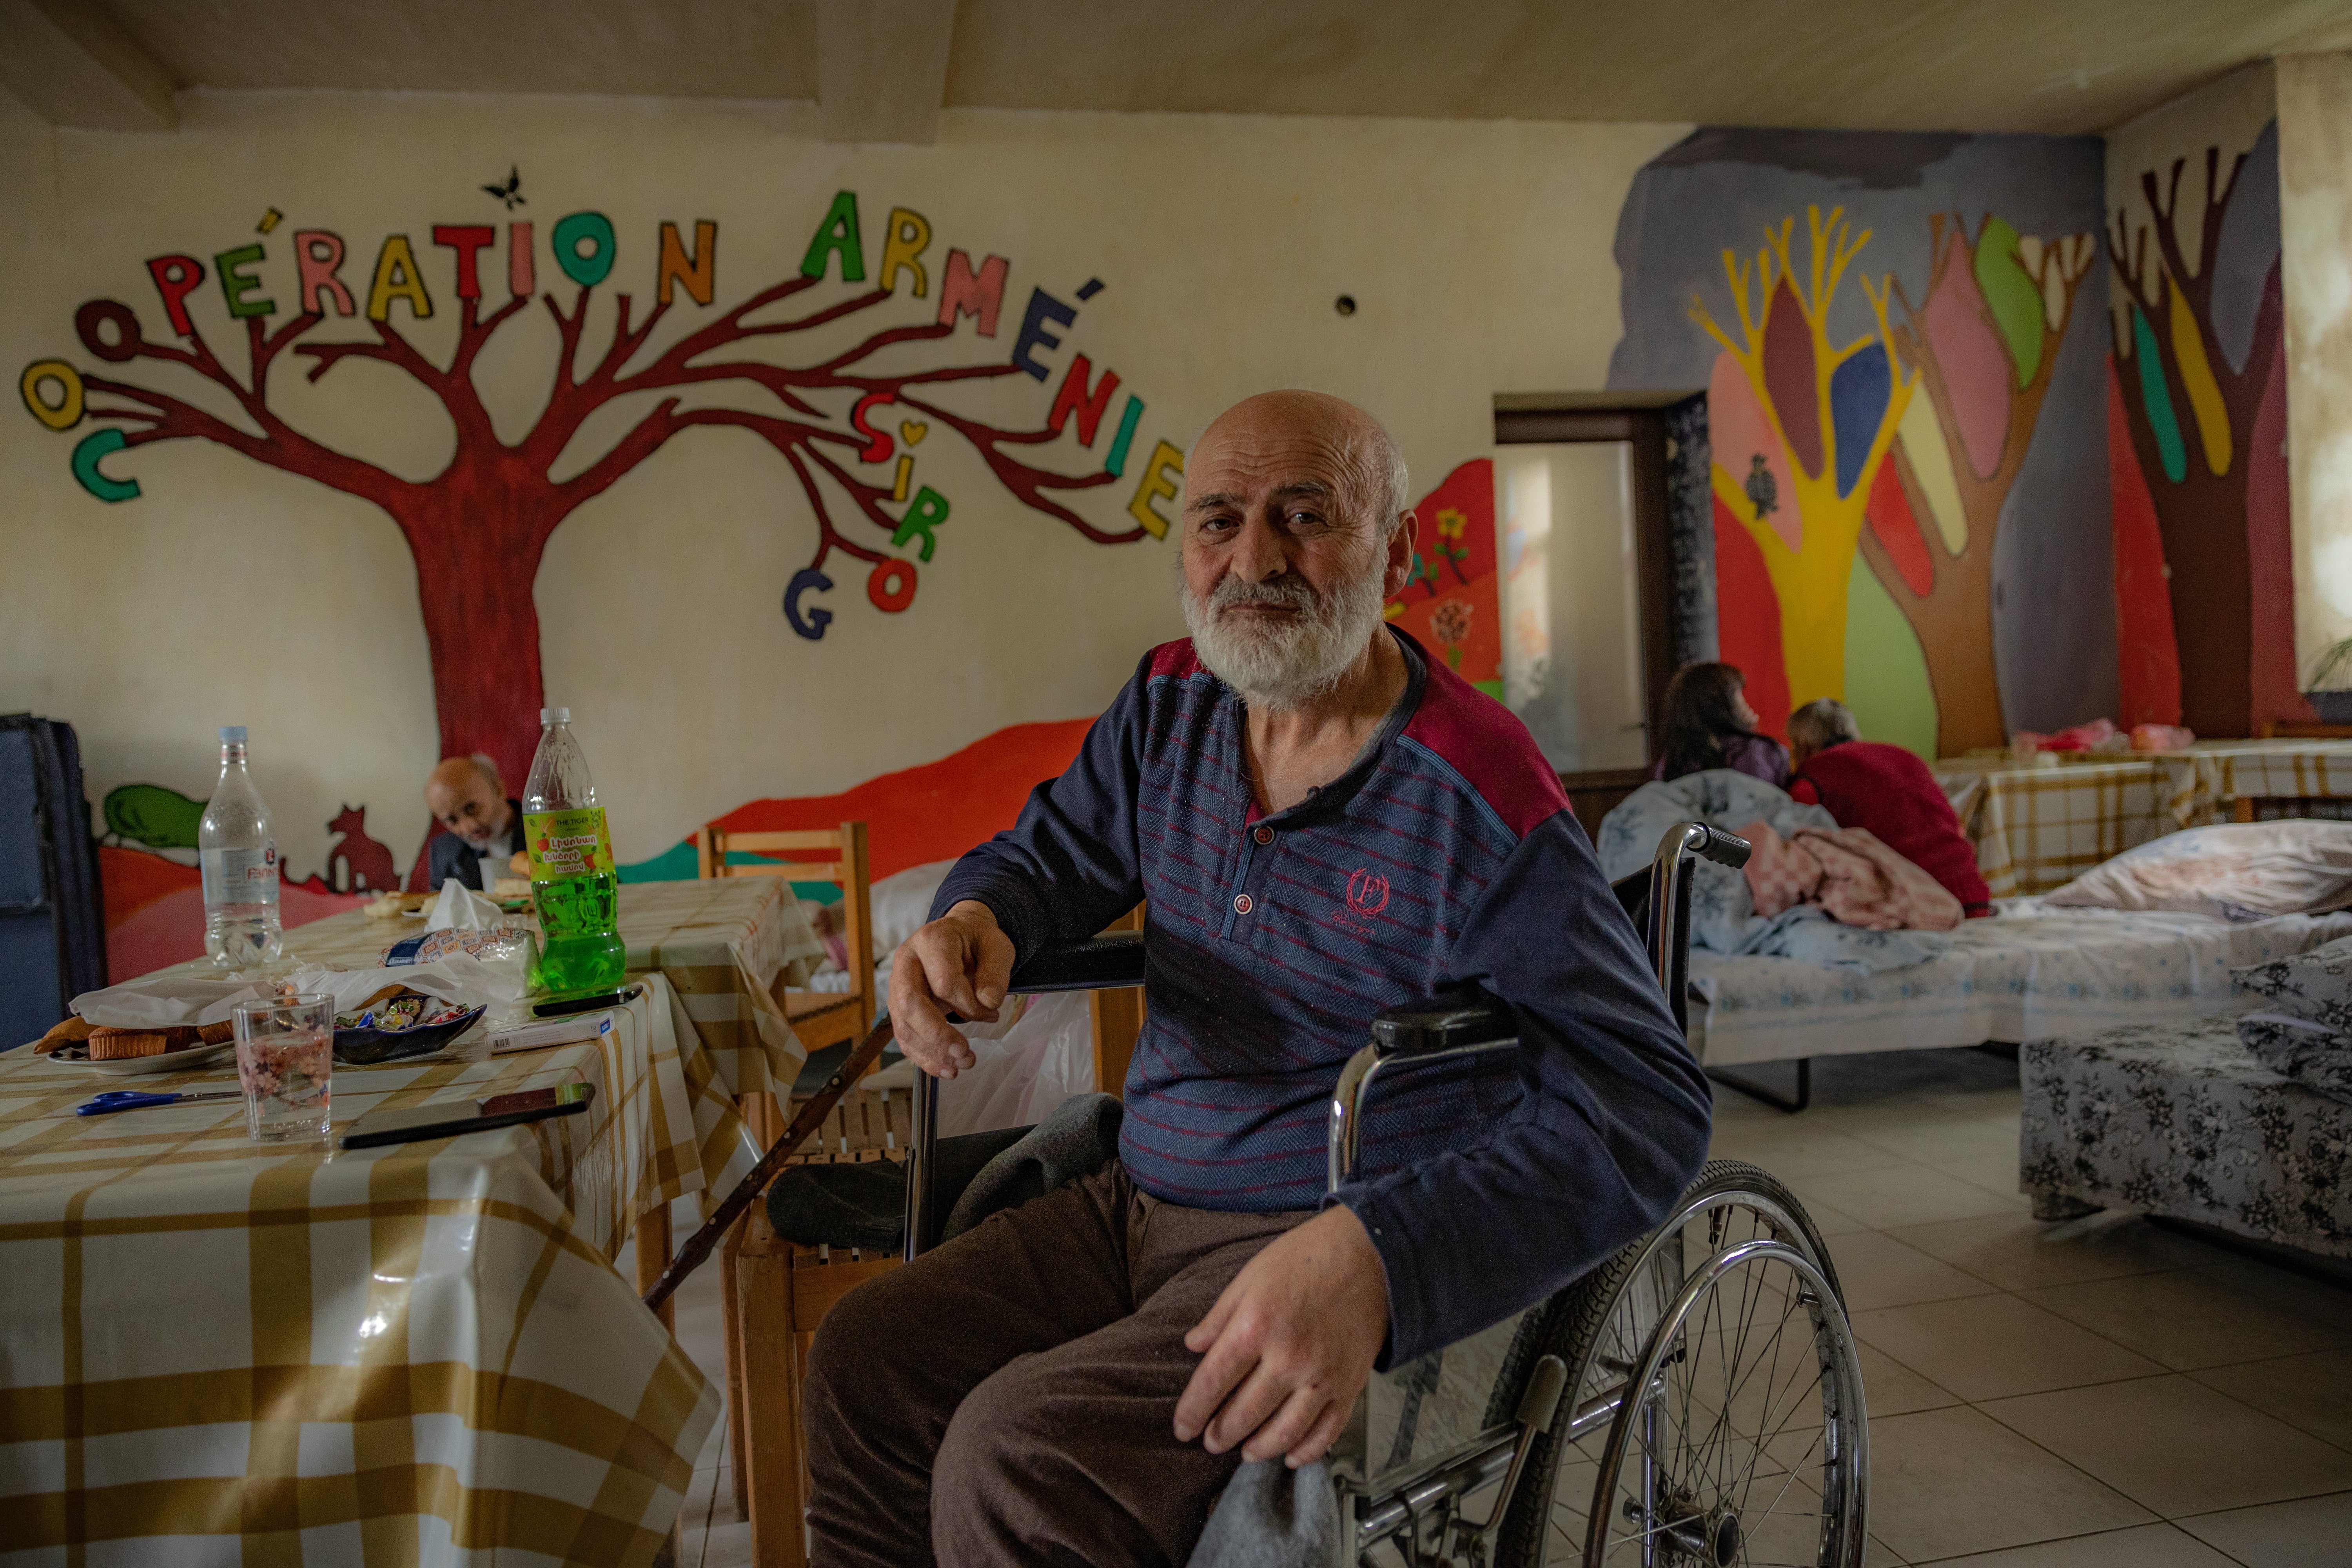 Elderly and disabled Armenian refugees are hosted in hotels, schools and private homes